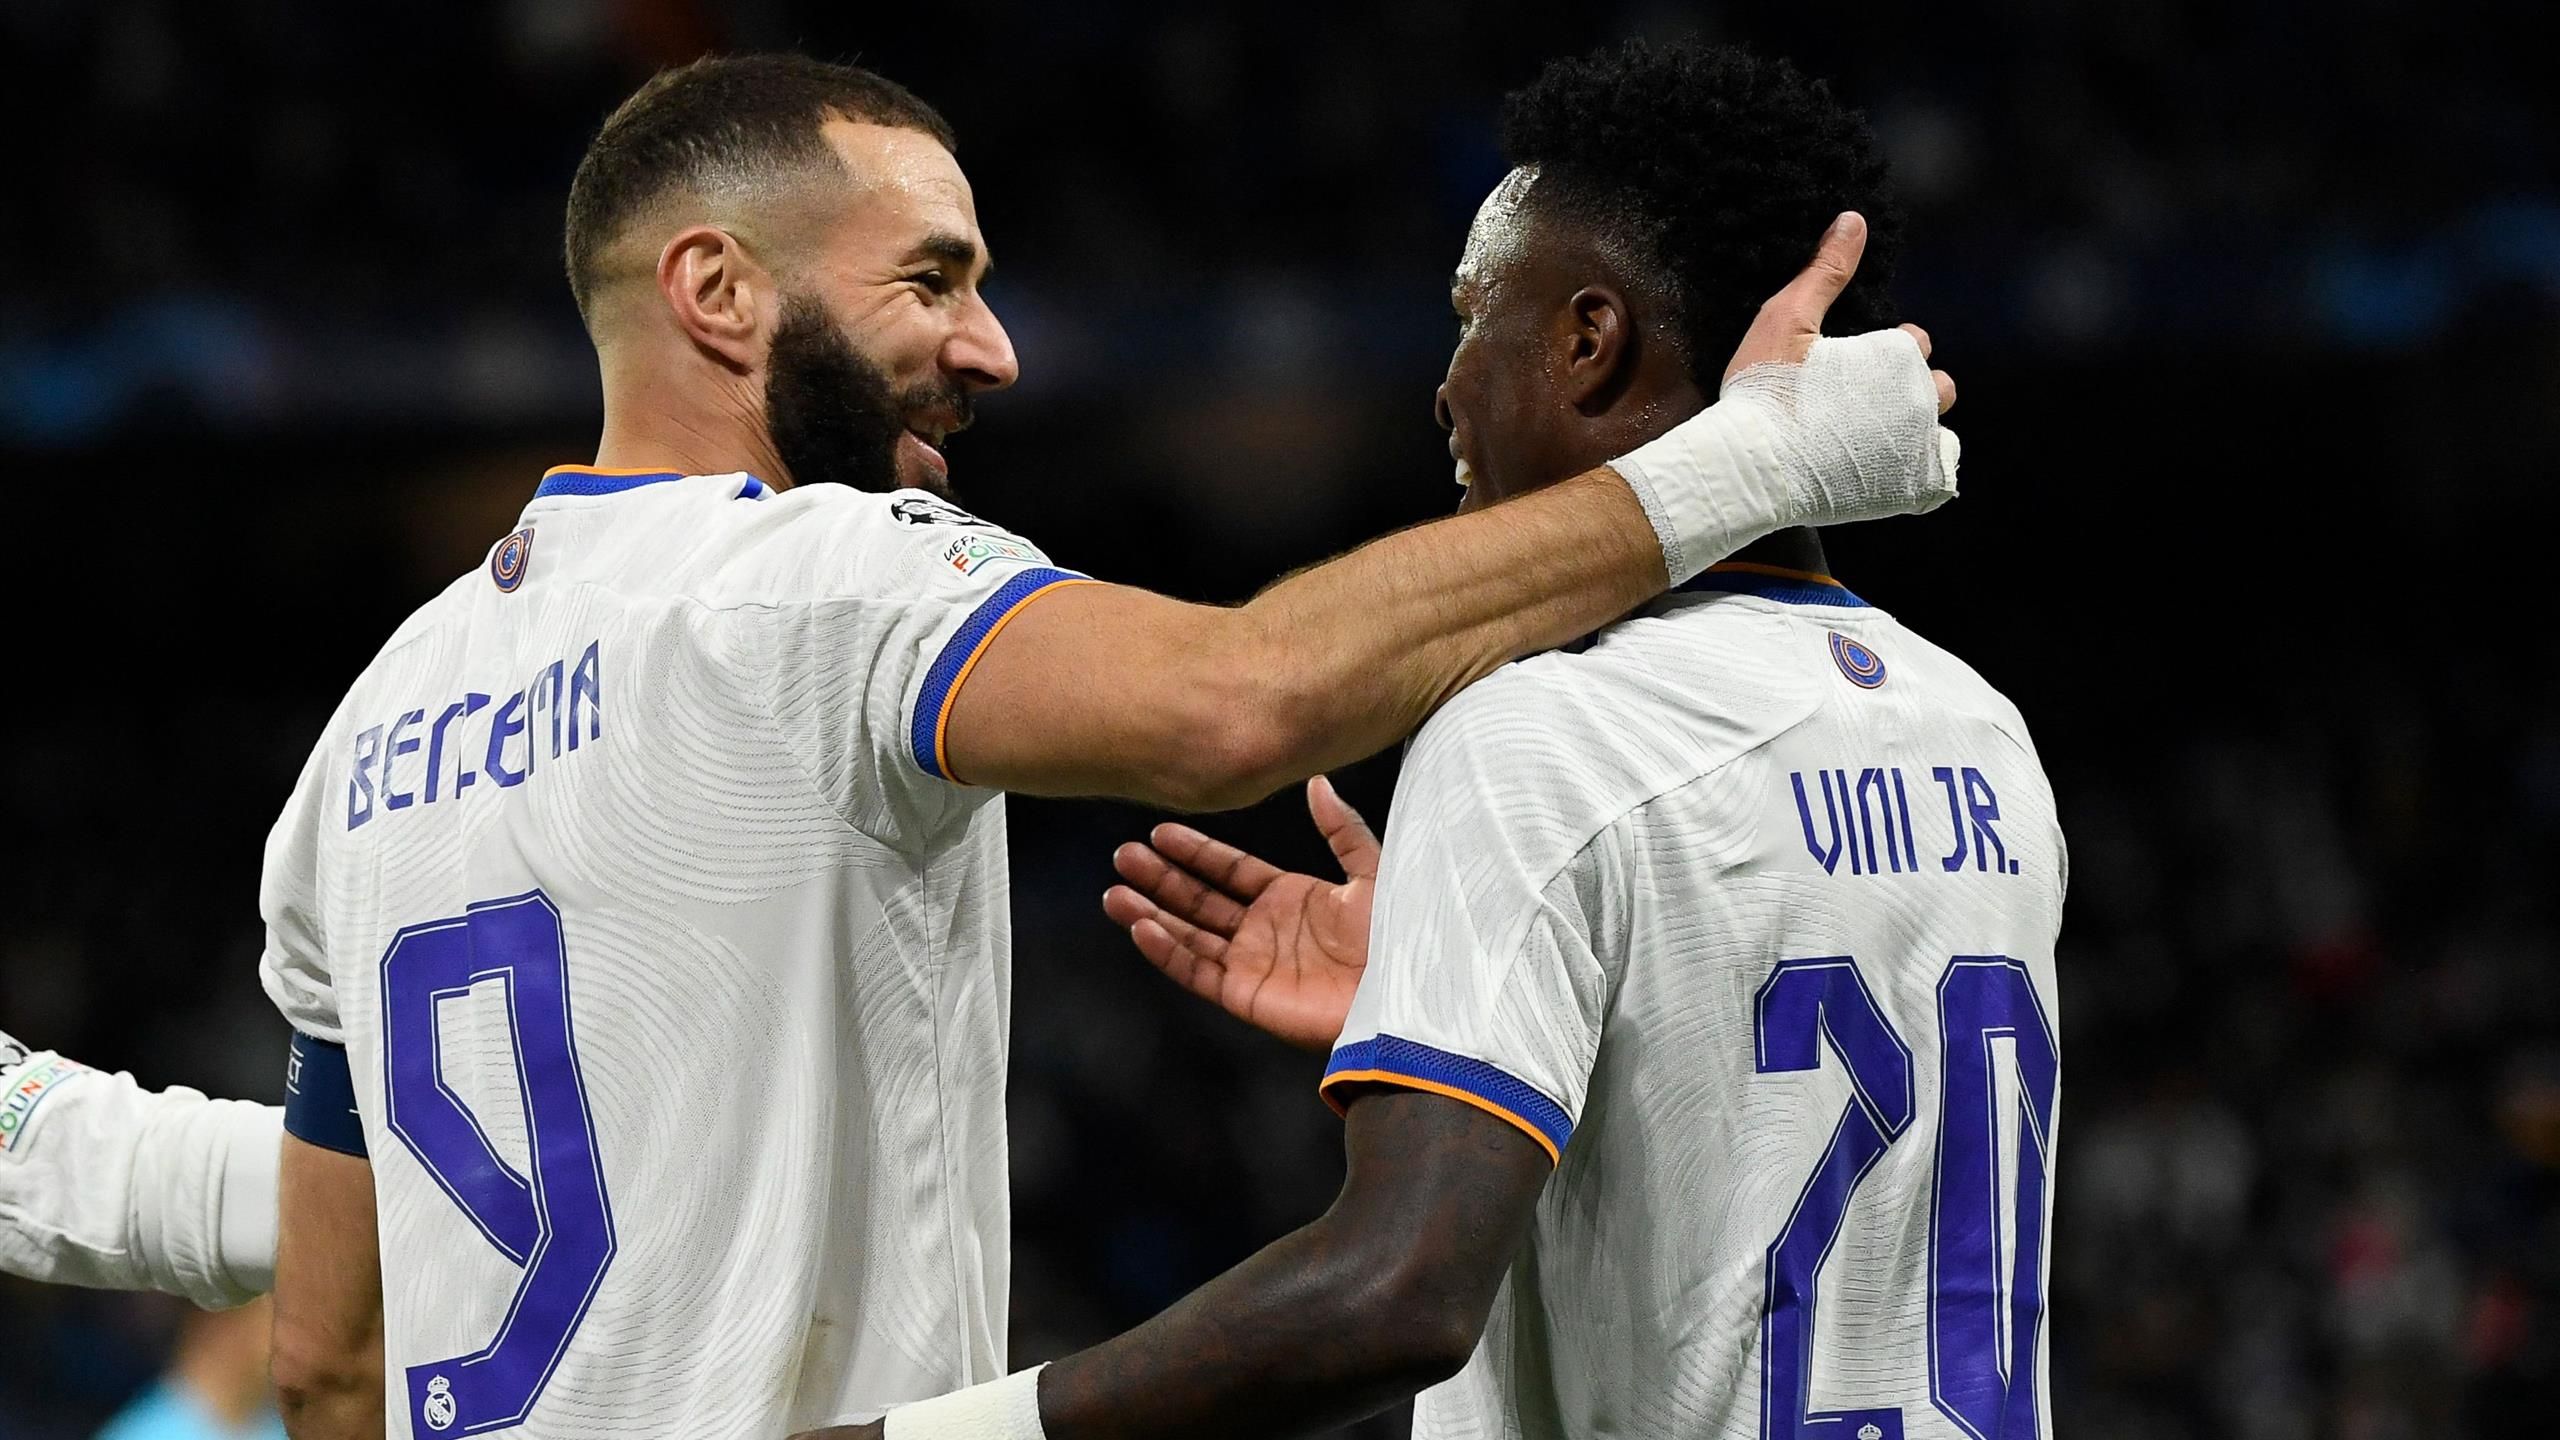 Opinion: Perfect pair Kenzema Benzema and Vinicius Junior currently the best attacking duo in Europe